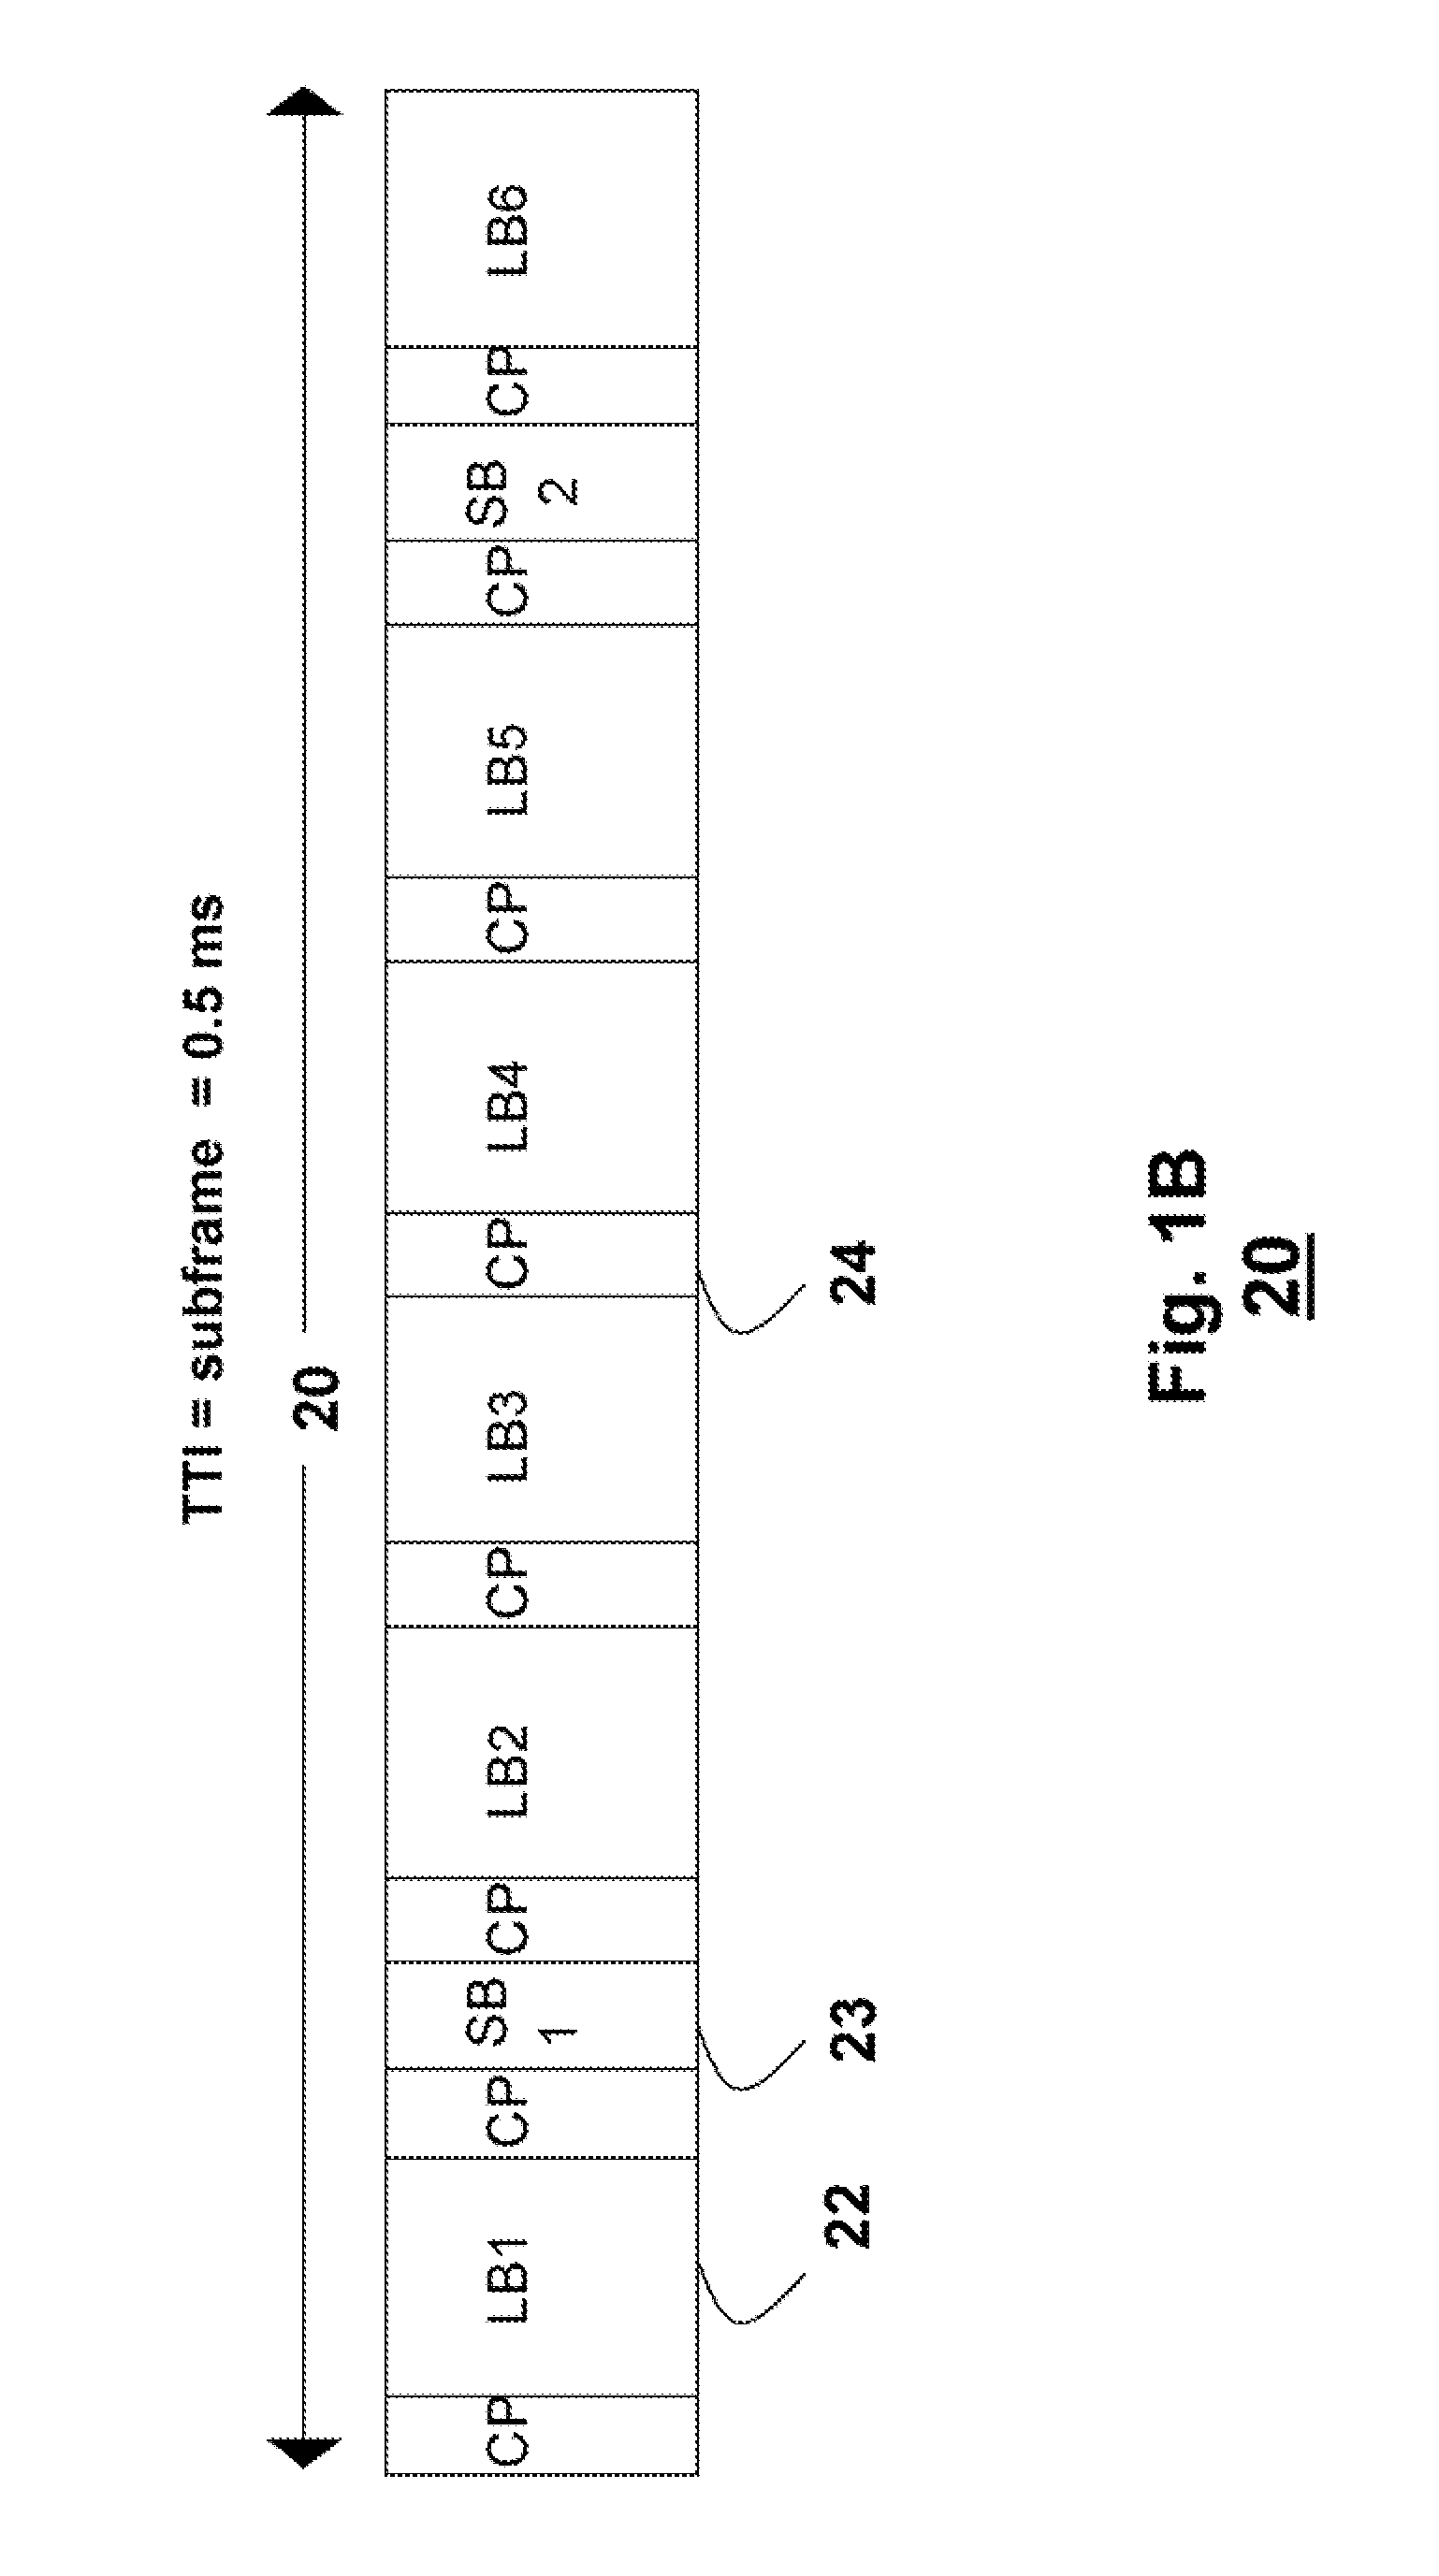 Method and System for Generating Antenna Selection Signals in Wireless Networks